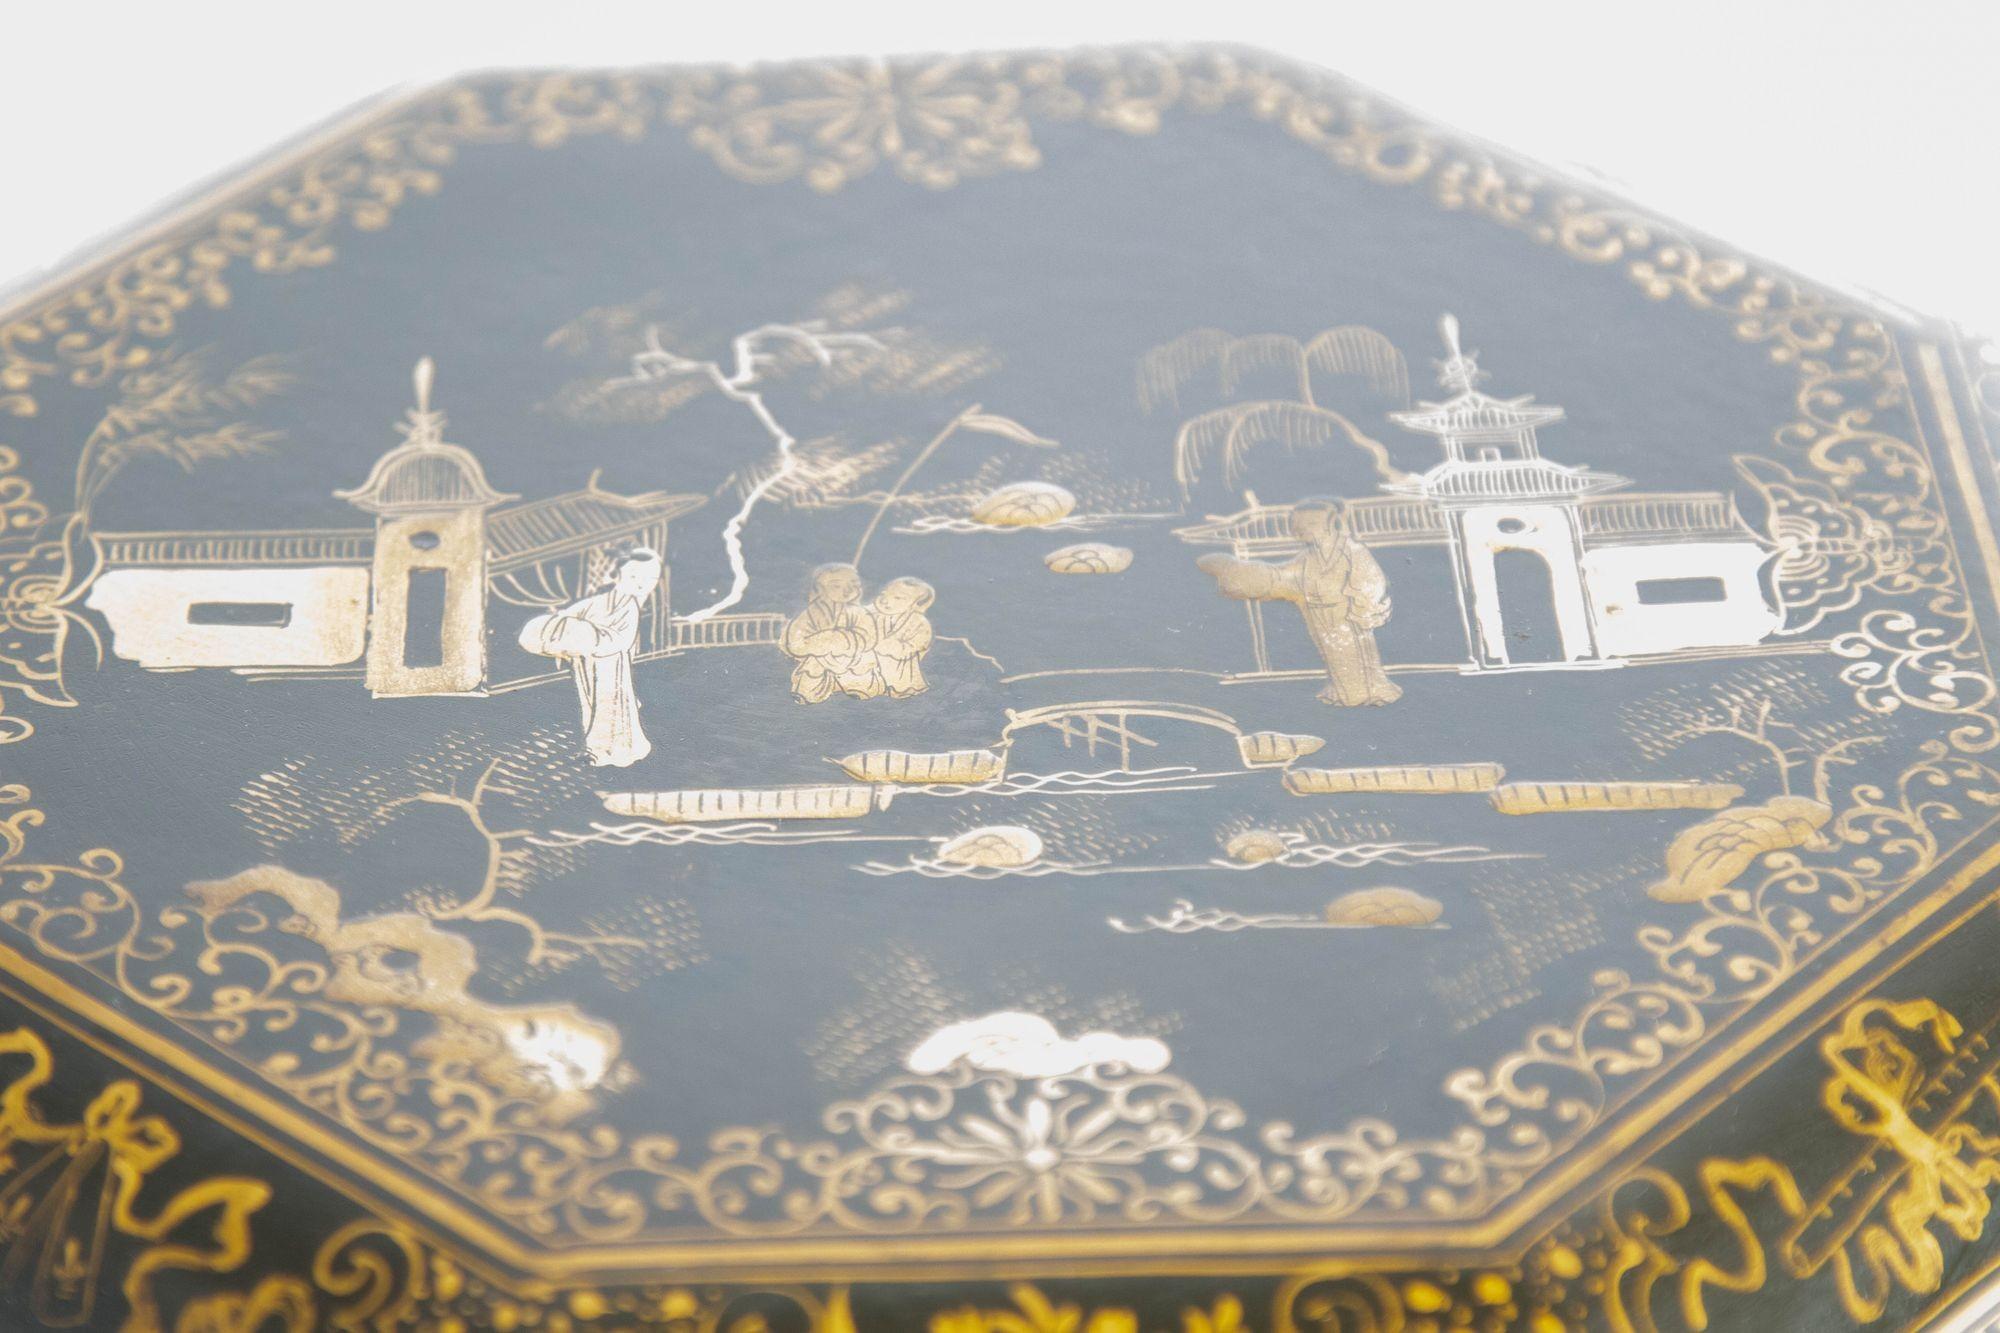 Large Chinese Export Octagonal Black Lacquered Gilt Painted Covered Box 1950s.
Chinese lacquer box with numerous figures and gilt detail.
Large Chinese black lacquered box with numerous figures and gilt detail.
Chinese black lacquer and gilt painted